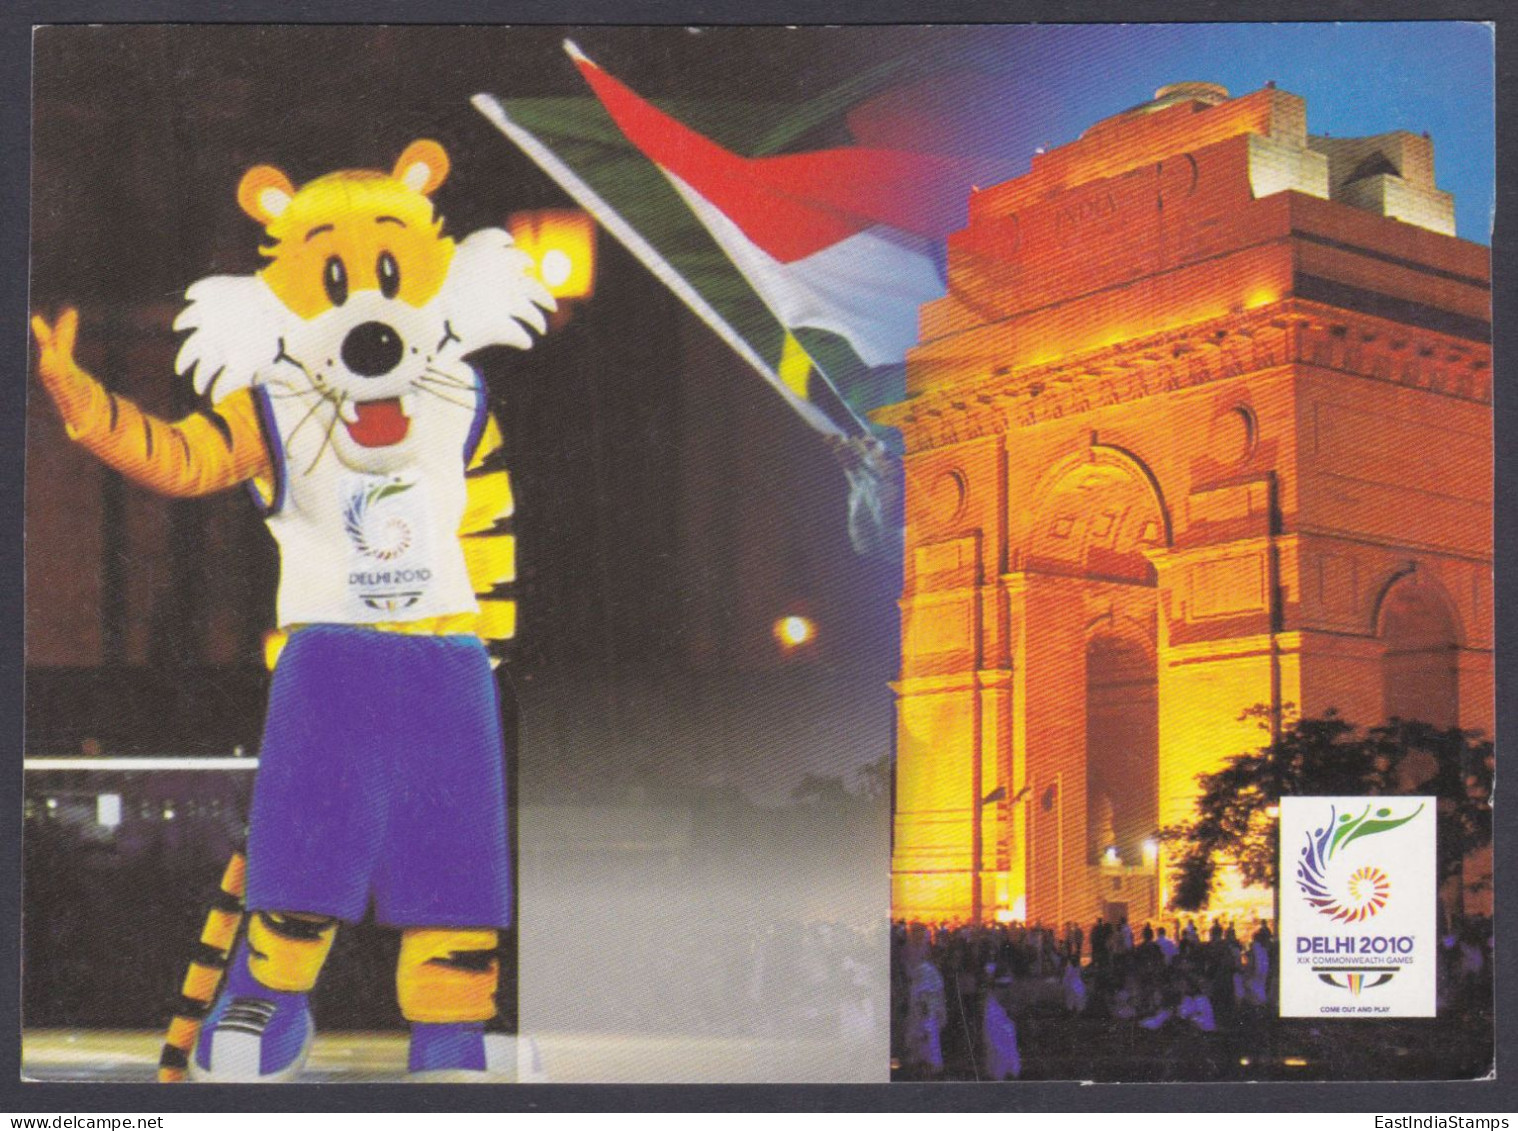 Inde India 2010 Mint Unused Postcard Delhi Commonwealth Games, Sport, Sports, India Gate, Indian Flag, Tiger, Mascot - Indien